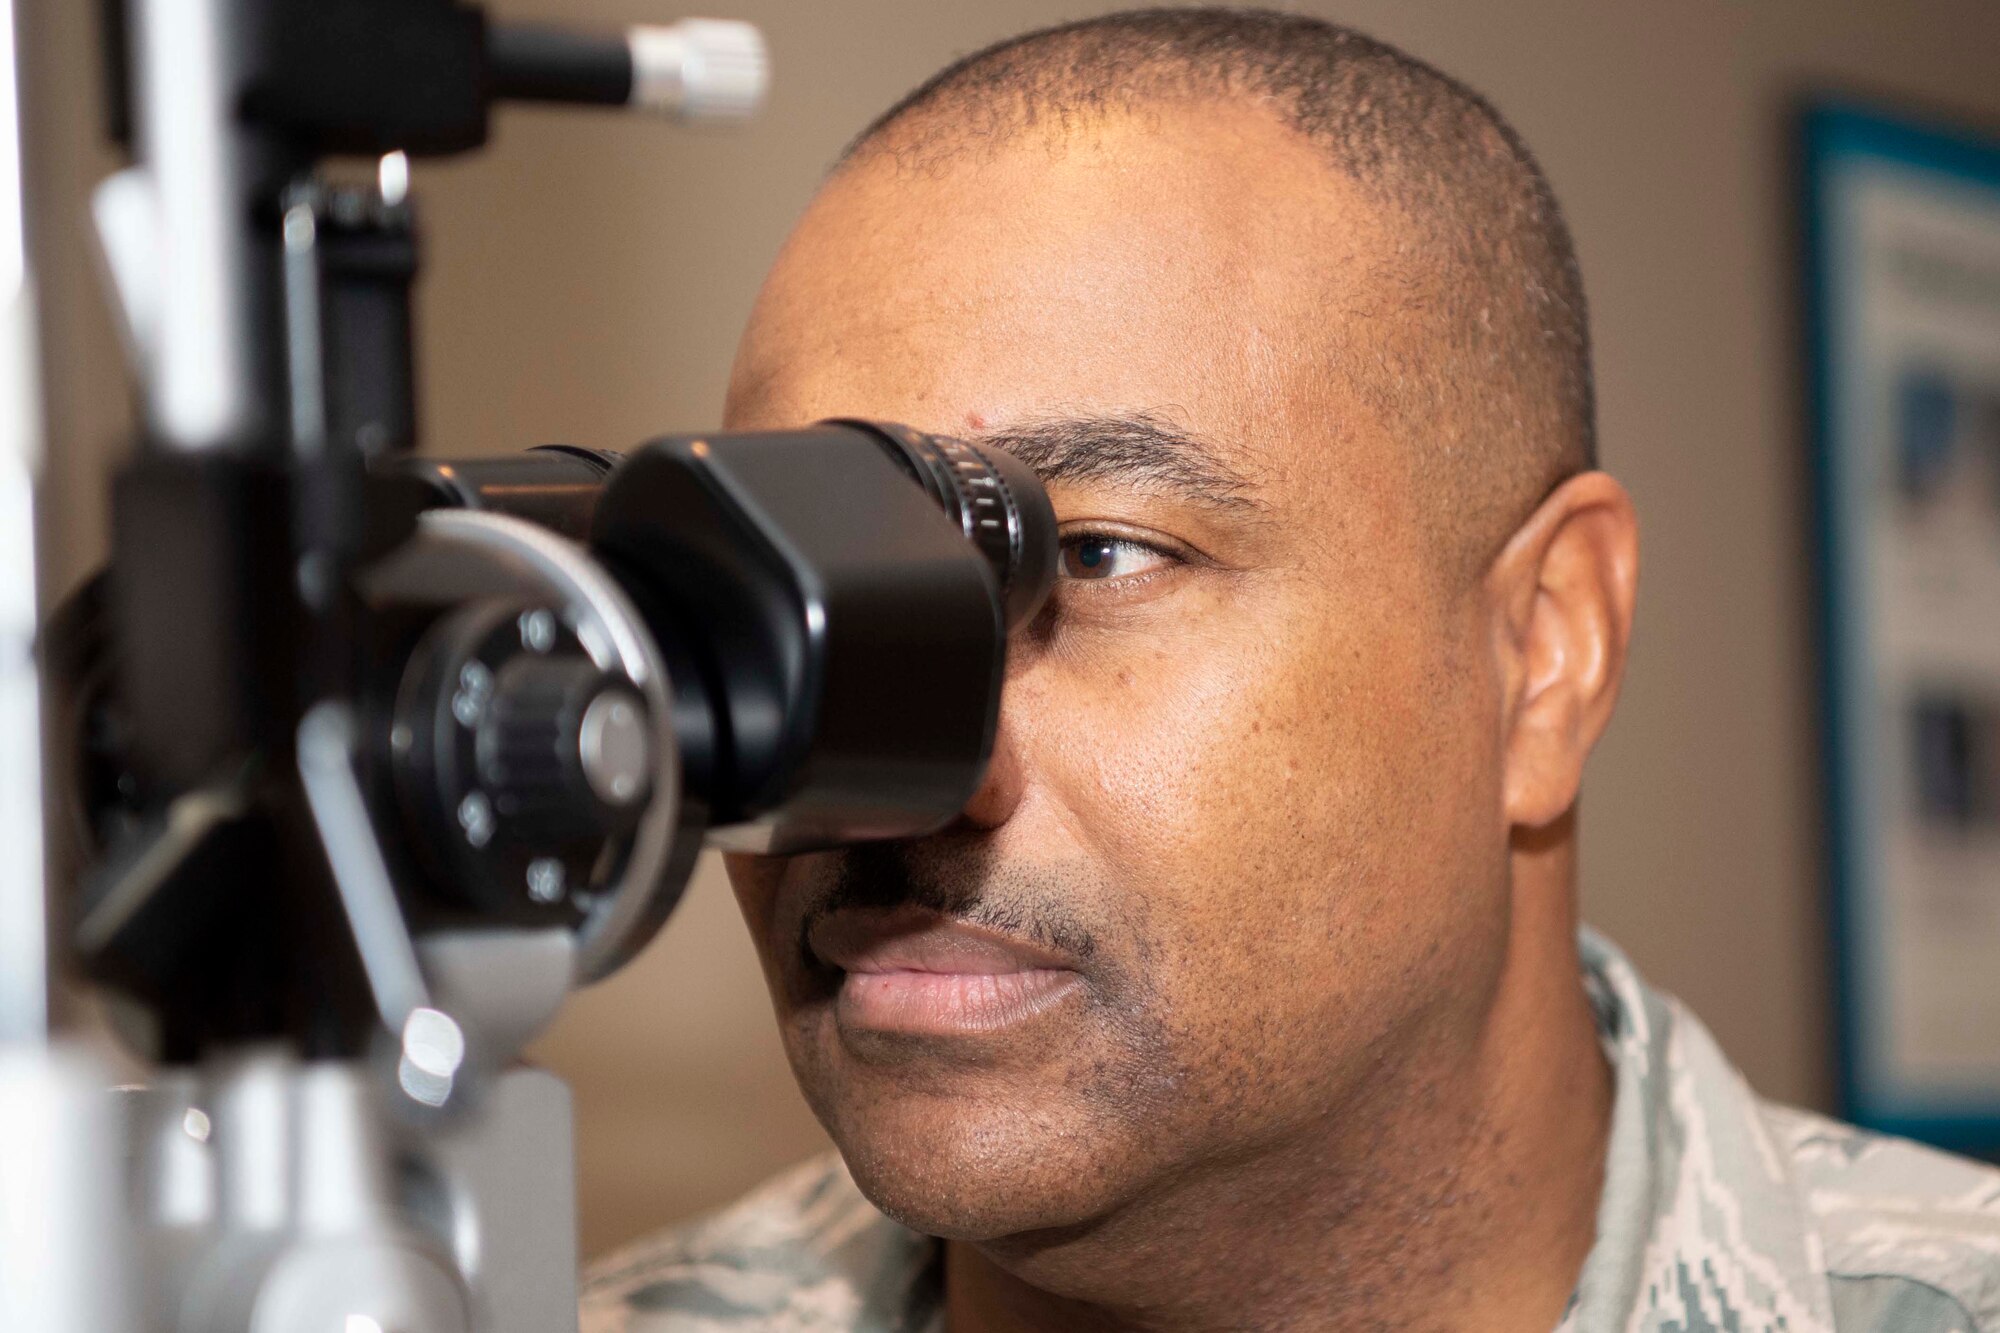 A U.S. Air Force optometrist performs and eye exam.